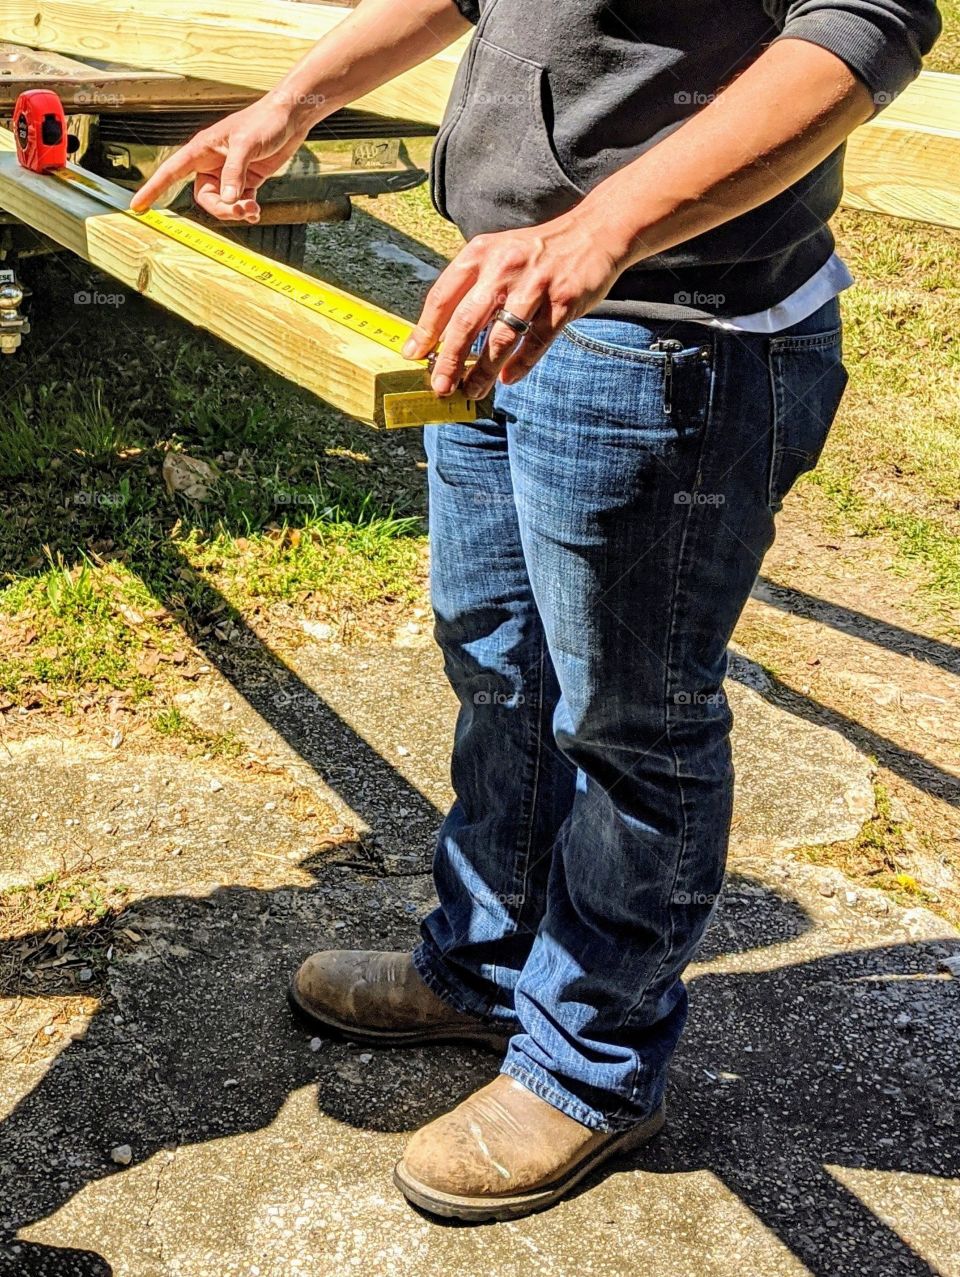 Man measuring lumber to build with hands